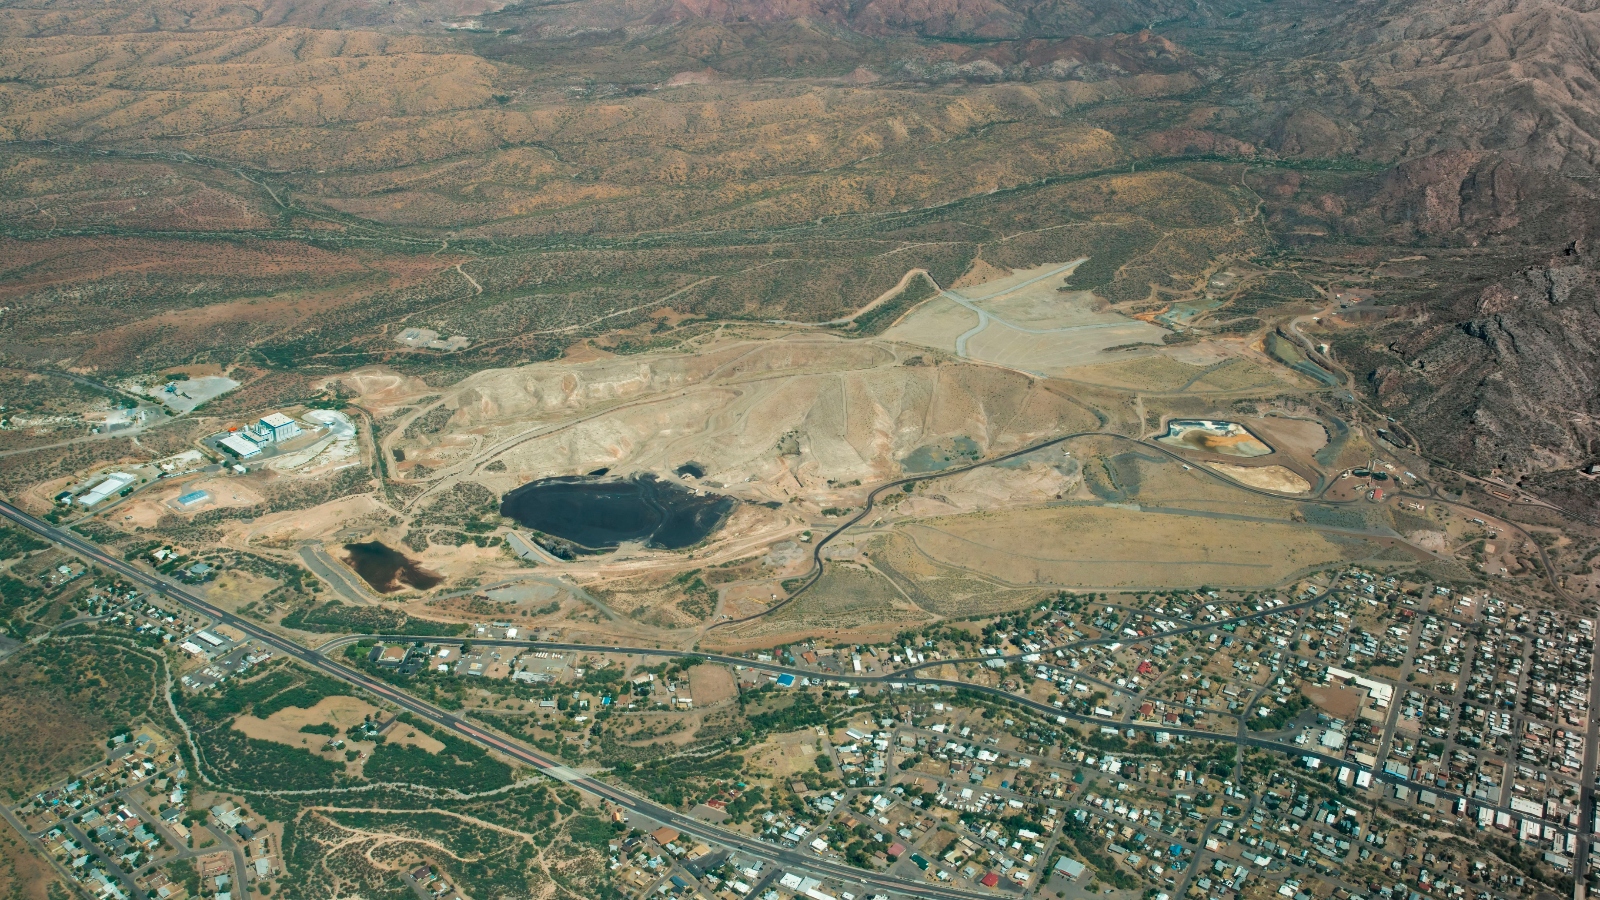 An aerial view of a mining pit next to a town.